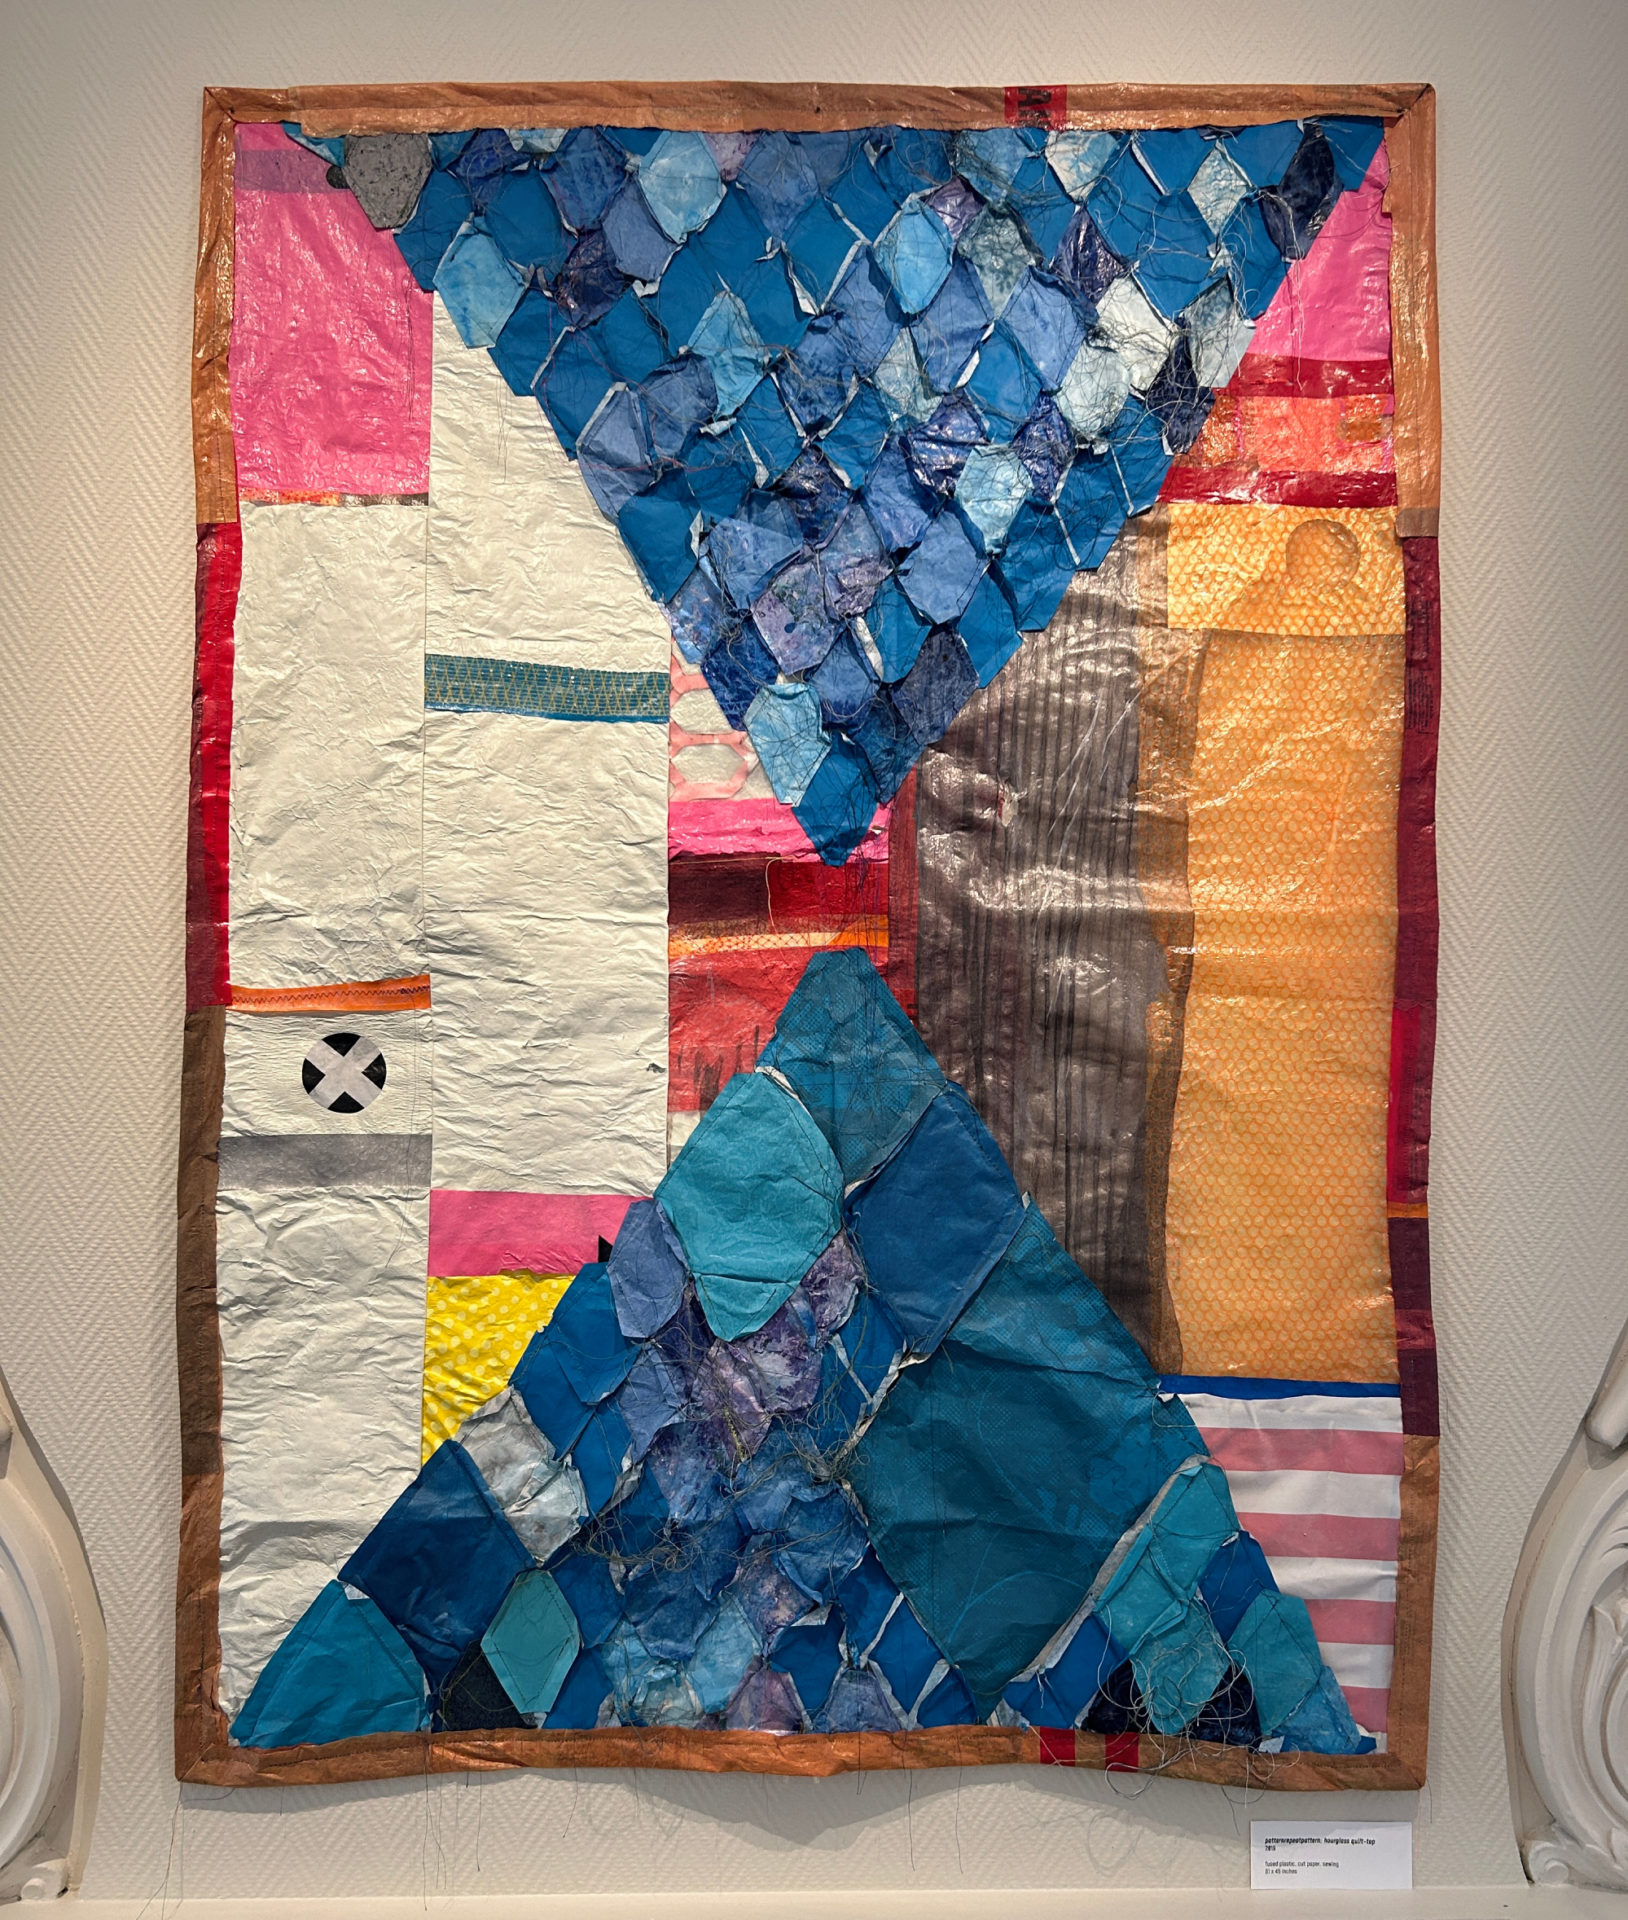 Brightly colored quilt made of plastics handing on a wall--bright blues and pink shapes make up the bulk of this quilt.